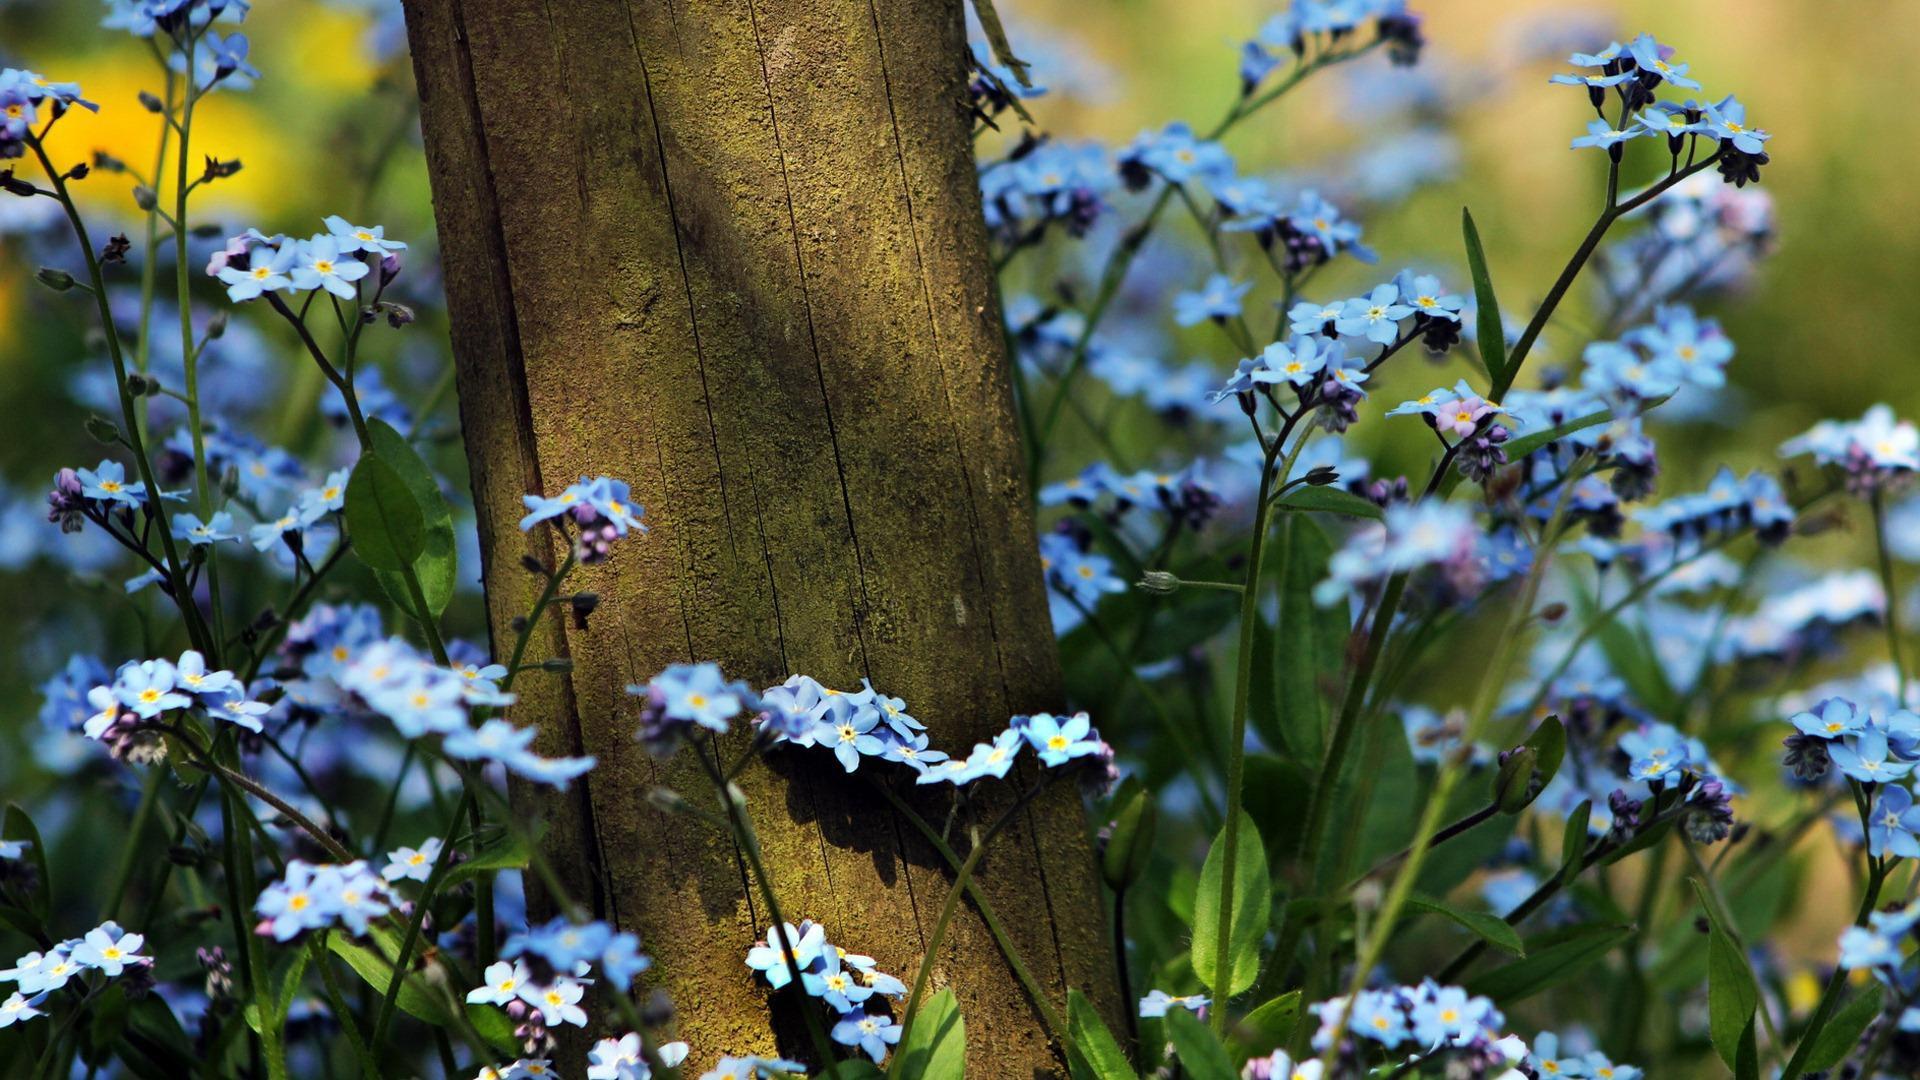 Forget Me Not Flower Wallpaper Image Photo Picture